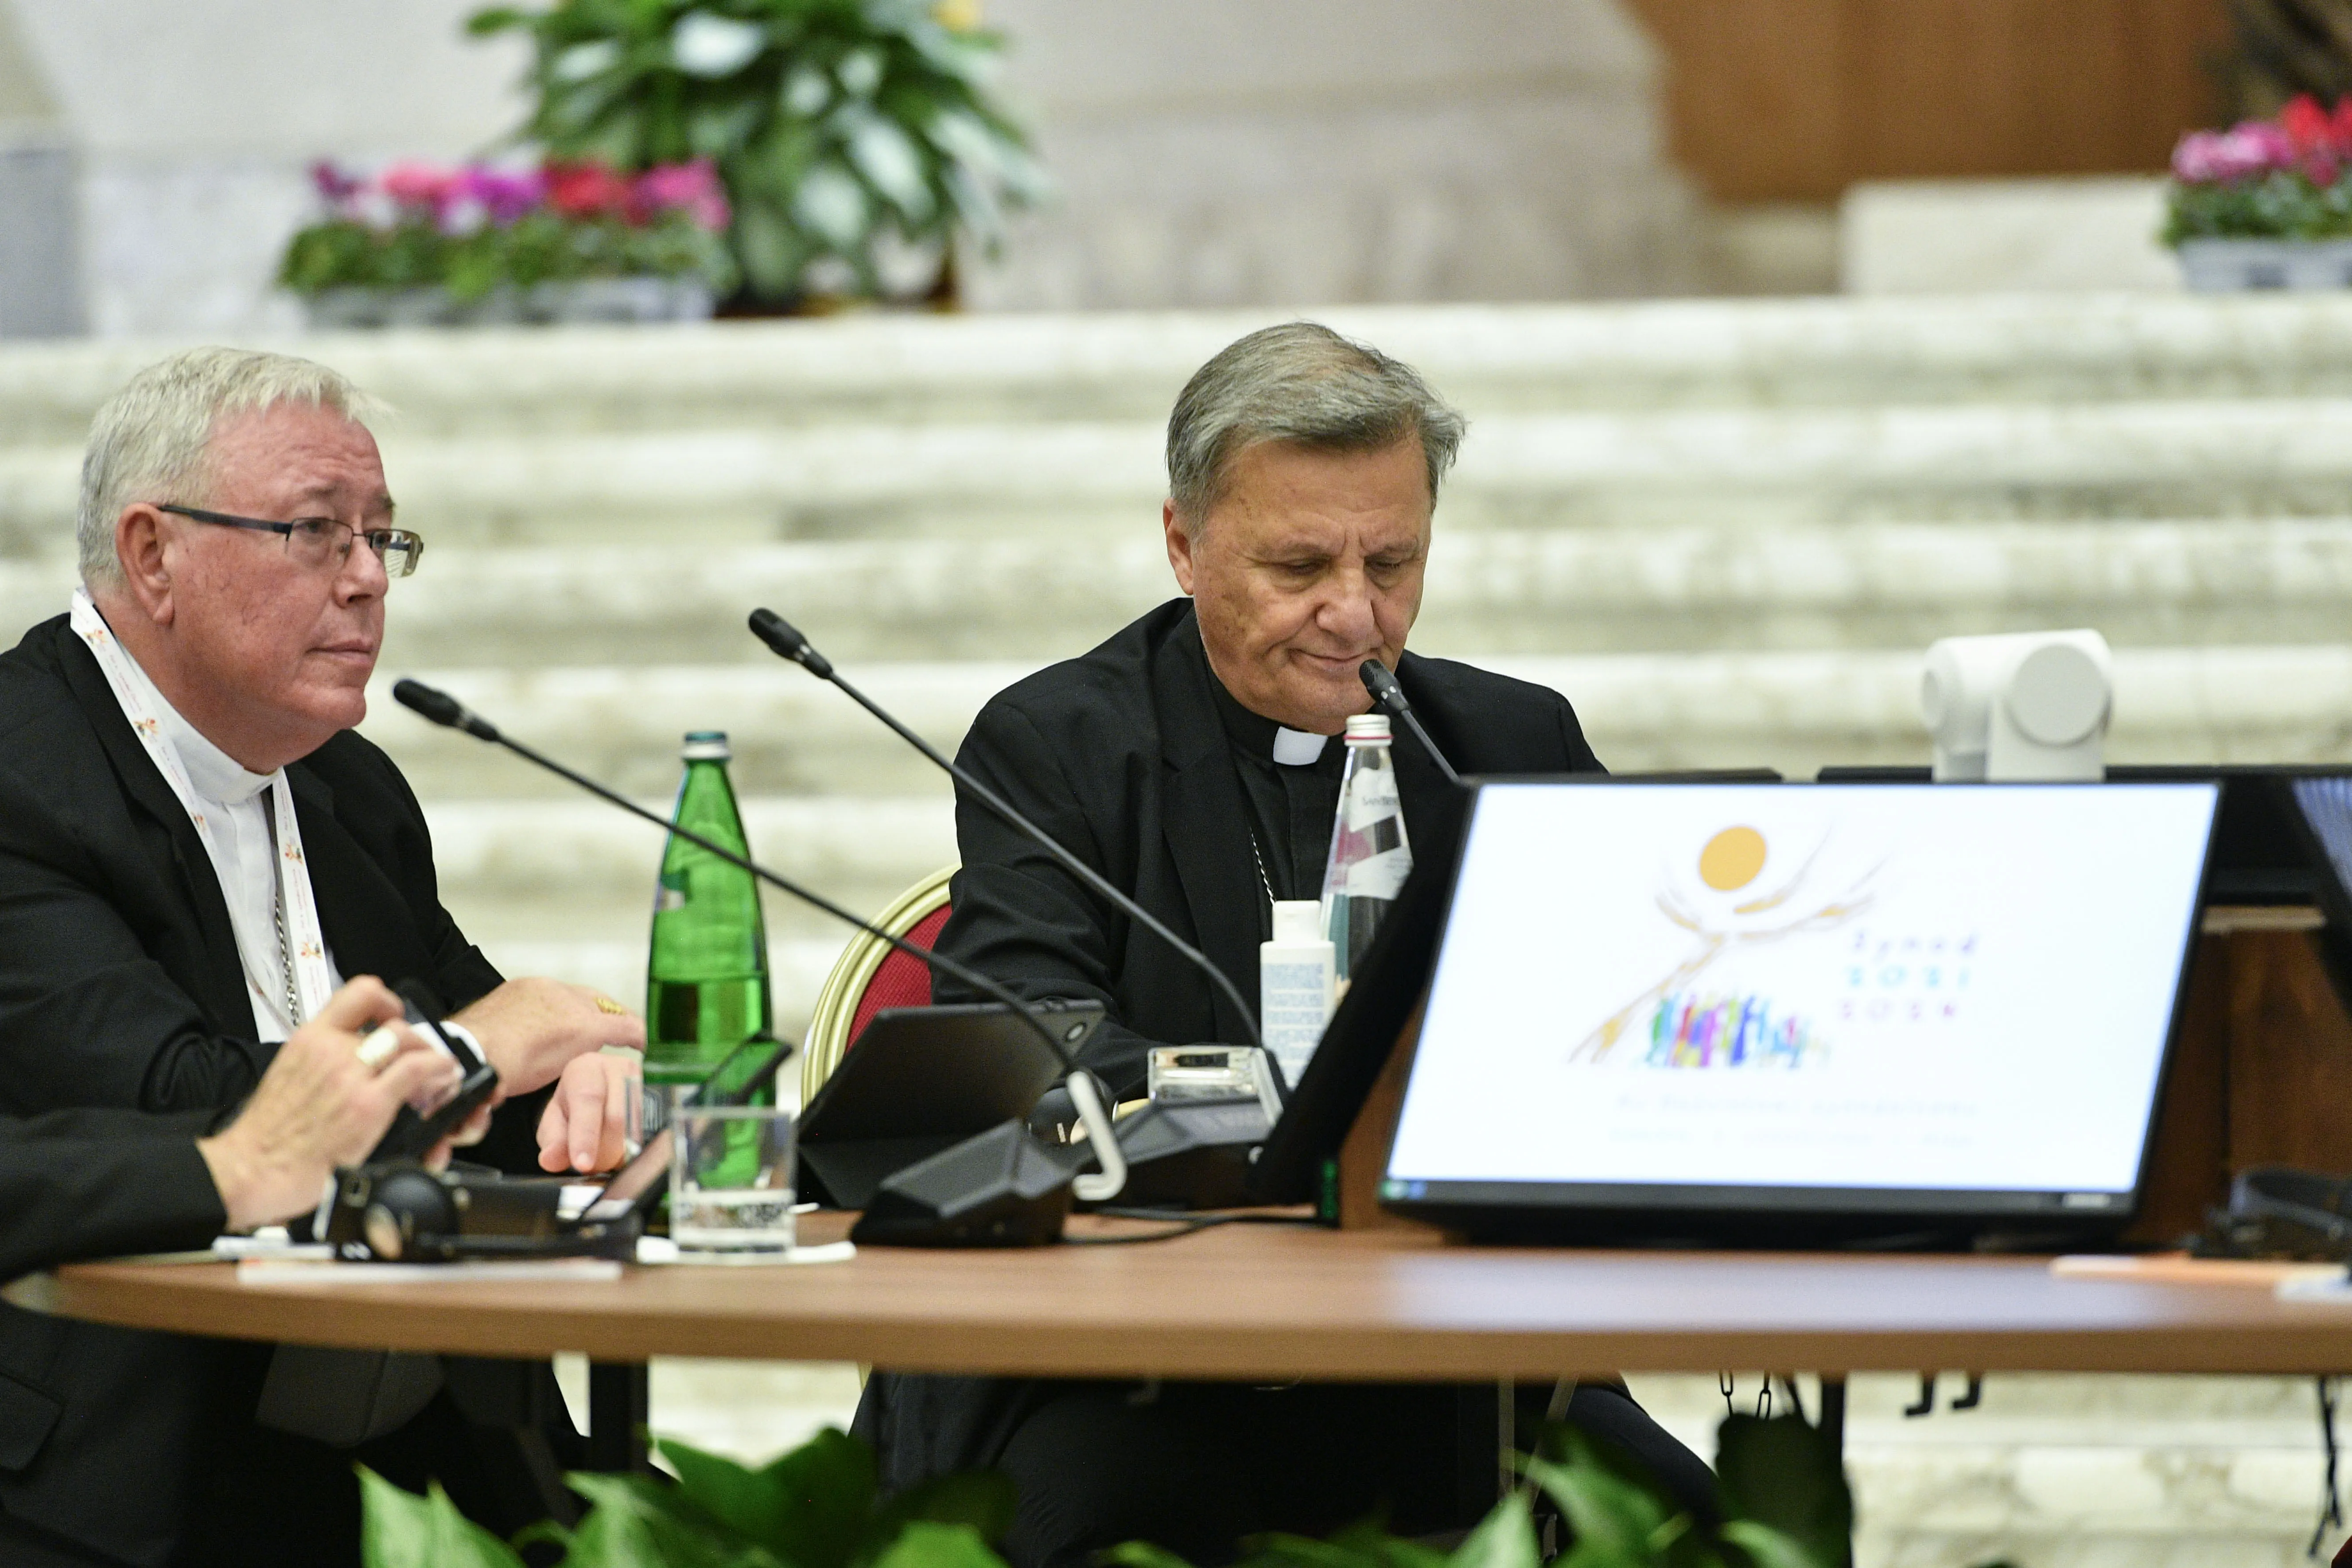 Cardinal Jean-Claude Hollerich (left), relator general of the Synod on Synodality, and Cardinal Mario Grech, secretary general of the Synod, at the Oct. 9, 2023, general congregation. Credit: Vatican Media